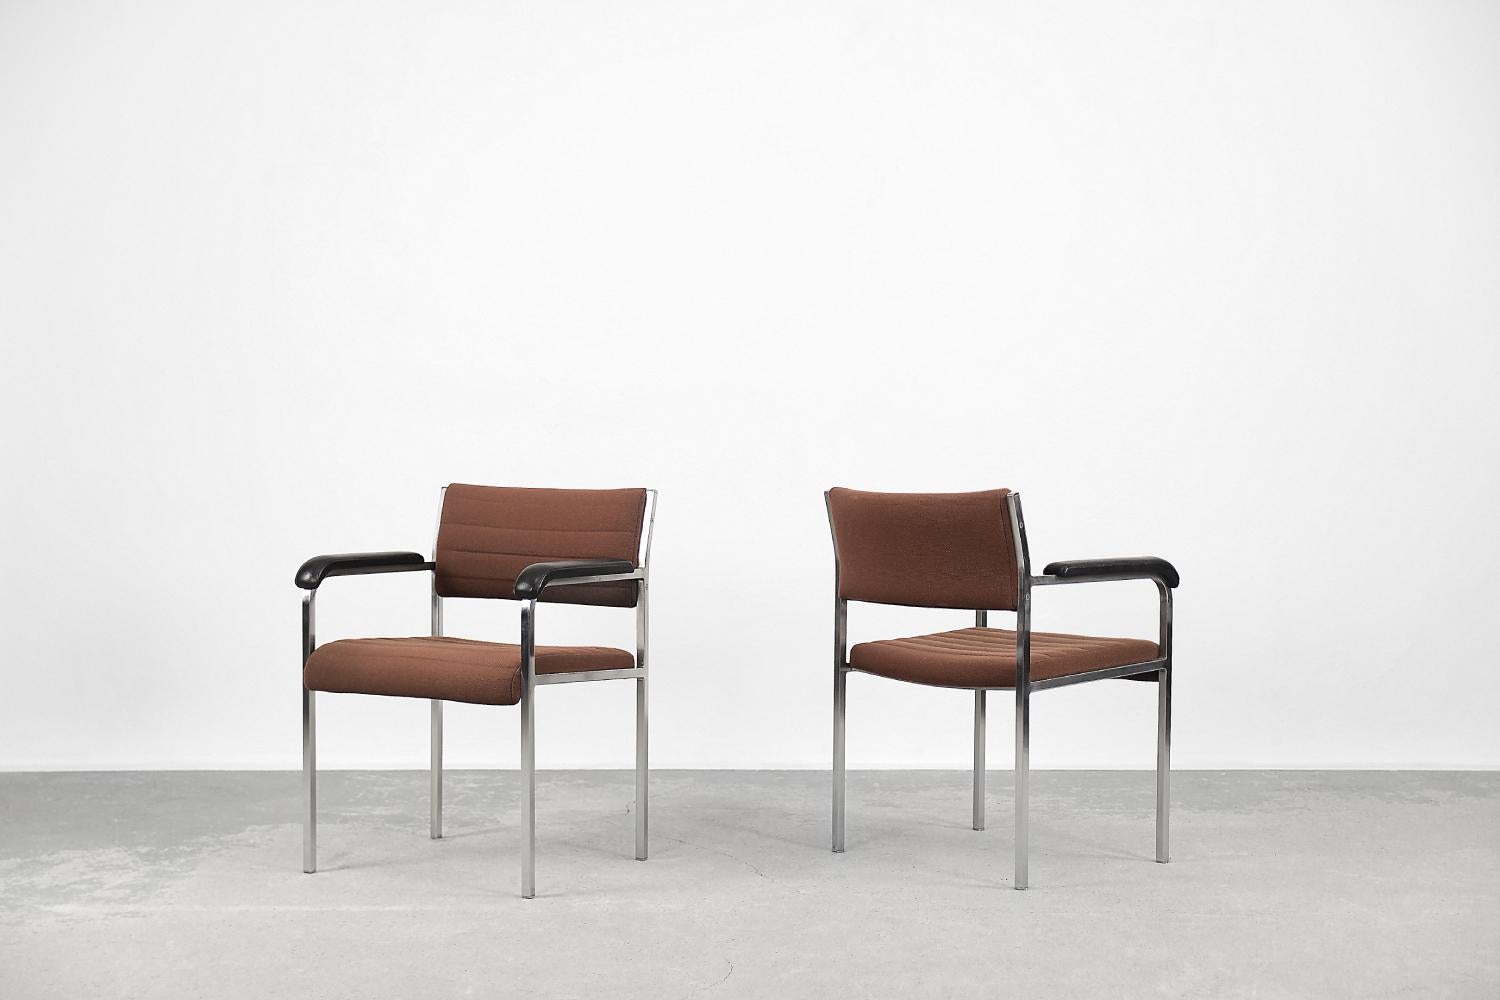 This pair of modernistic armchairs was produced by the German manufactory Fröscher Sitform during the 1970s. The frame is made of solid aluminum. The armchairs are upholstered with thick fabric in an interesting bricky shade of brown. Additionally,